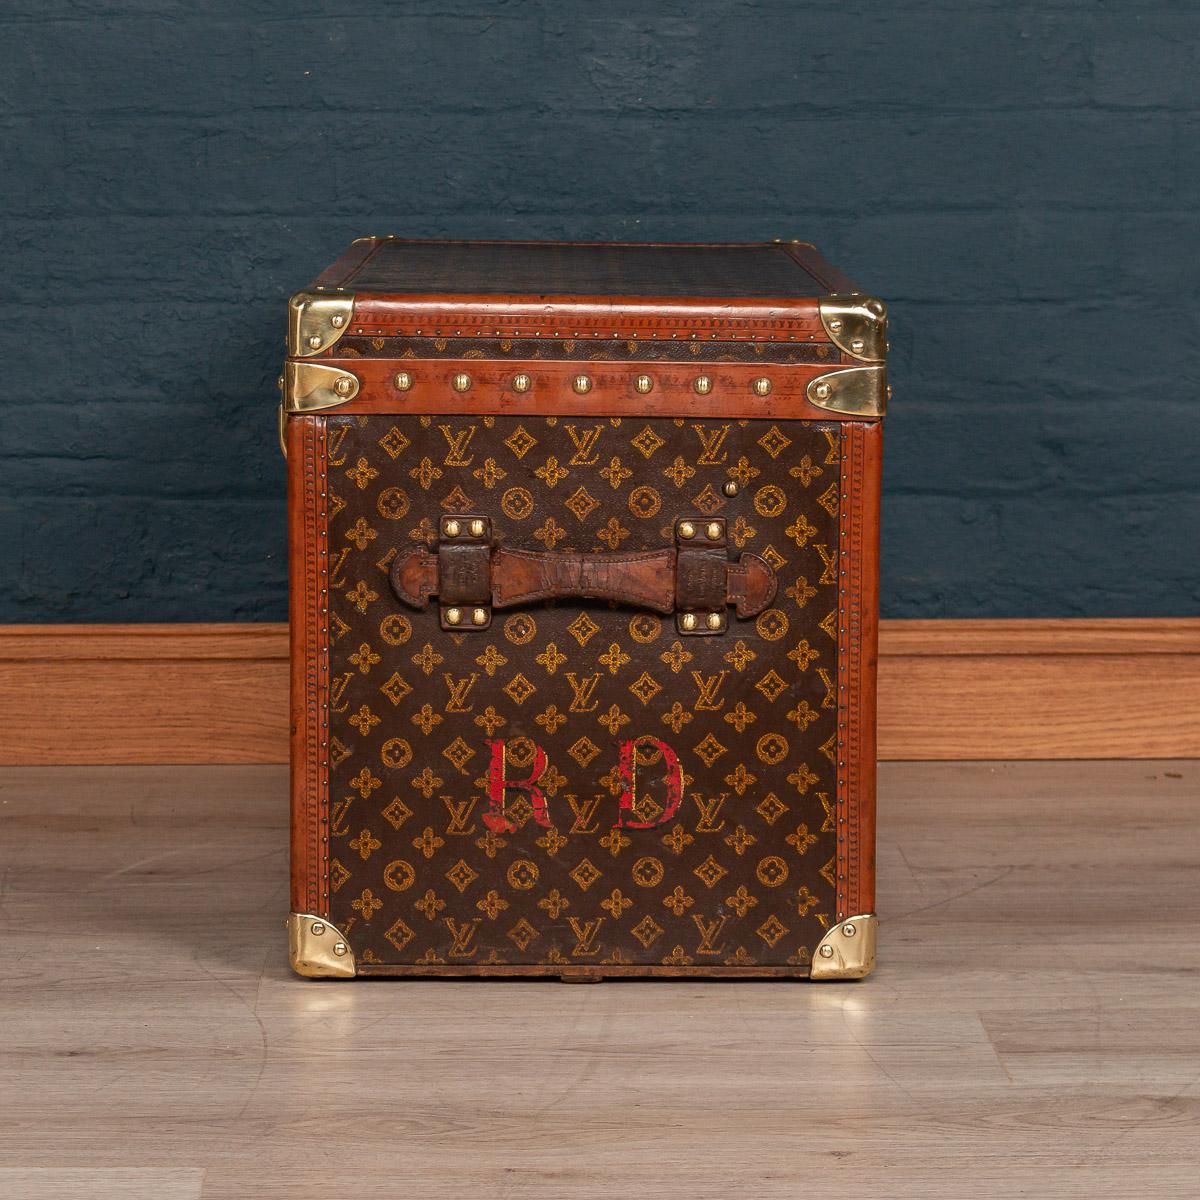 A very rare hat trunk by Louis Vuitton, made in France, circa 1930. The trunk opens to reveal a removable tray for two top hats and underneath the space for a further three top hats. Of wonderful proportions, this trunk is a superb example of an